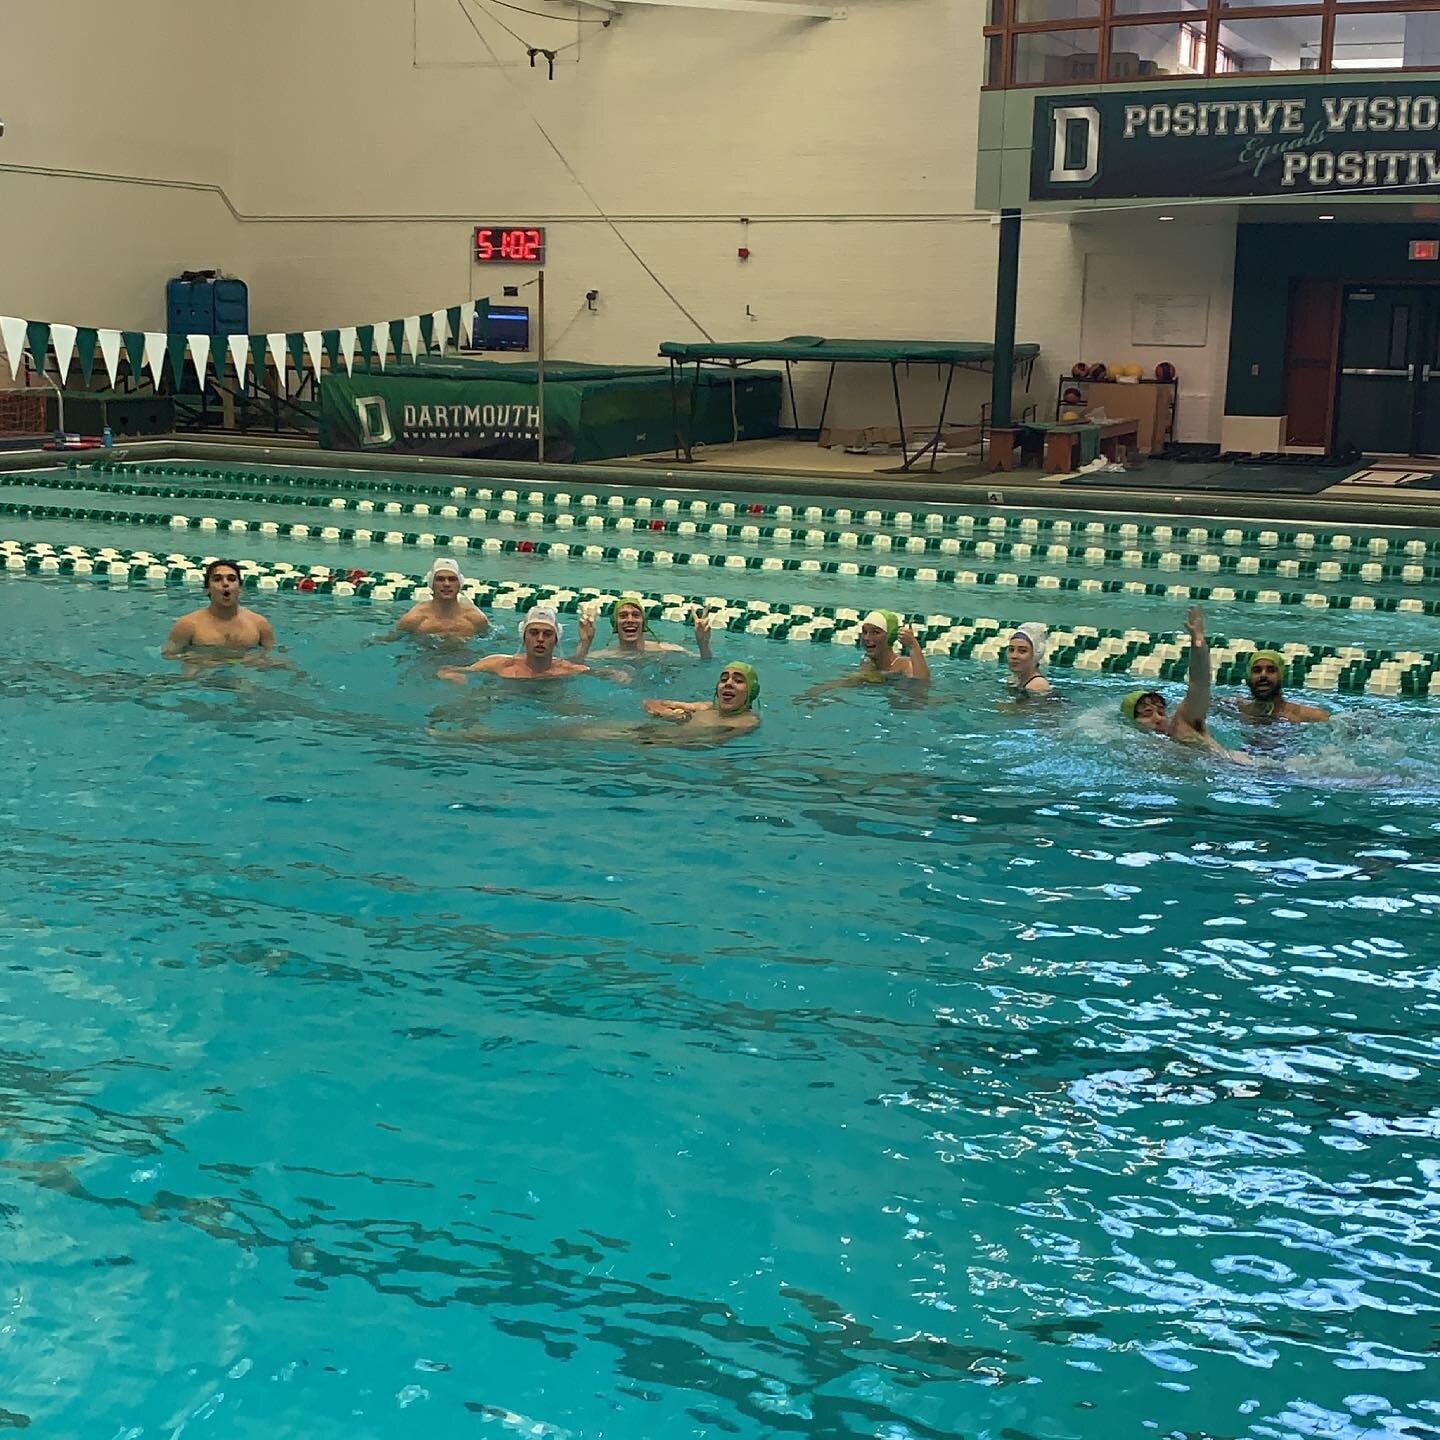 First practice back since covid! 🎉 Dartmouth Men&rsquo;s Water Polo is excited to be back in the pool as we get ready for the fall season